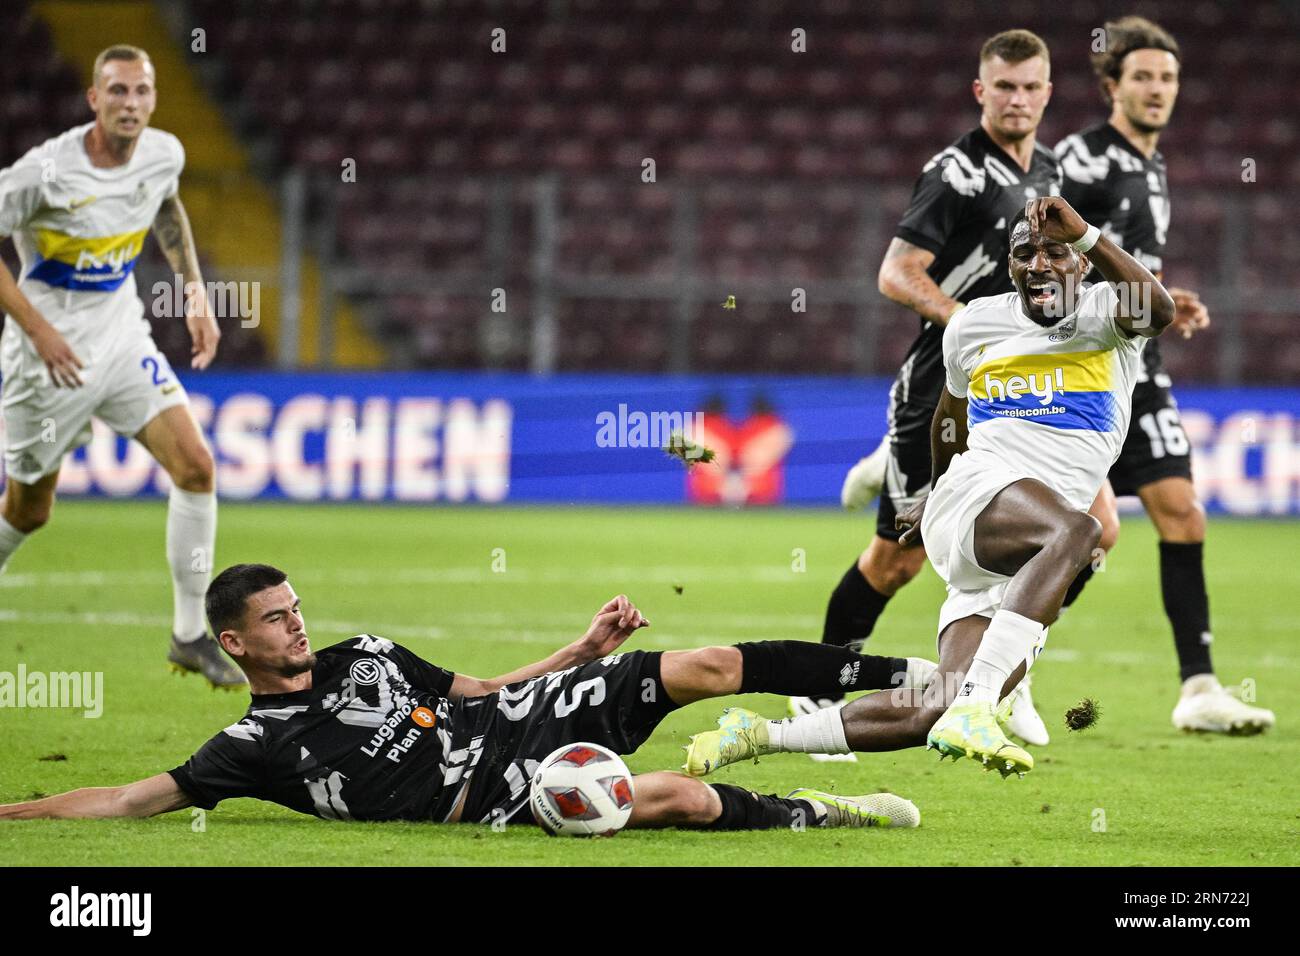 Lugano, Switzerland. 29th Nov, 2020. Cristopher Lungoyi (#8 FC Lugano) and  Albian Hajdari (#76 FC Basel 1893) in action during the Swiss Super League  match between FC Lugano and FC Basel 1893